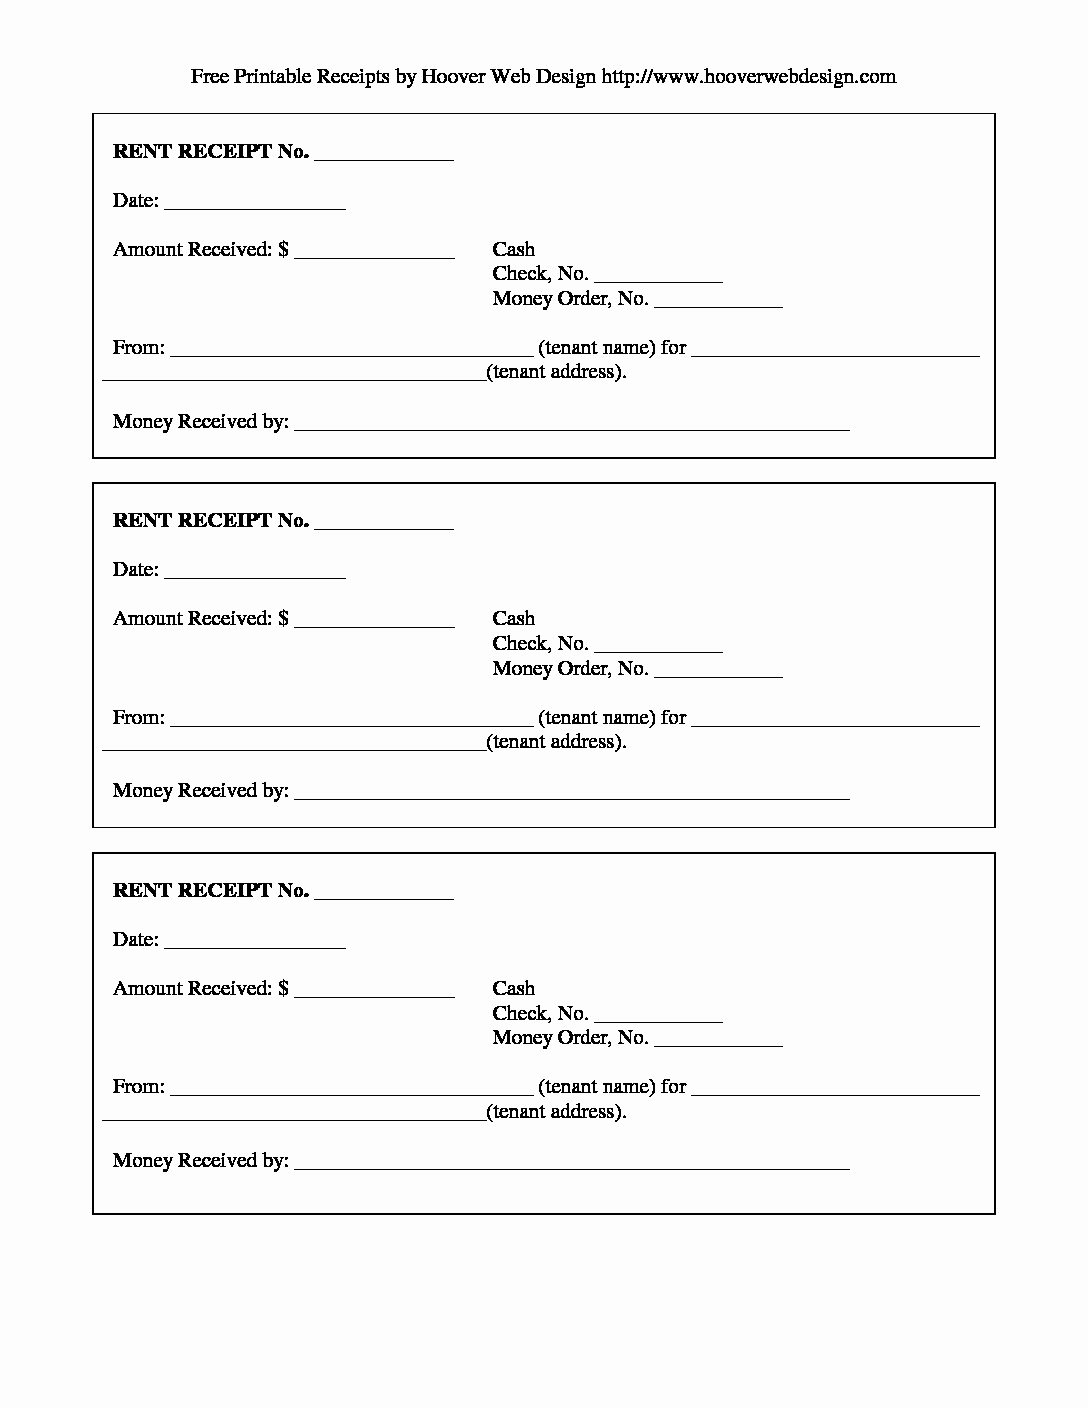 Free Rent Receipt Template Pdf New Free Rent Receipt Template and What Information to Include